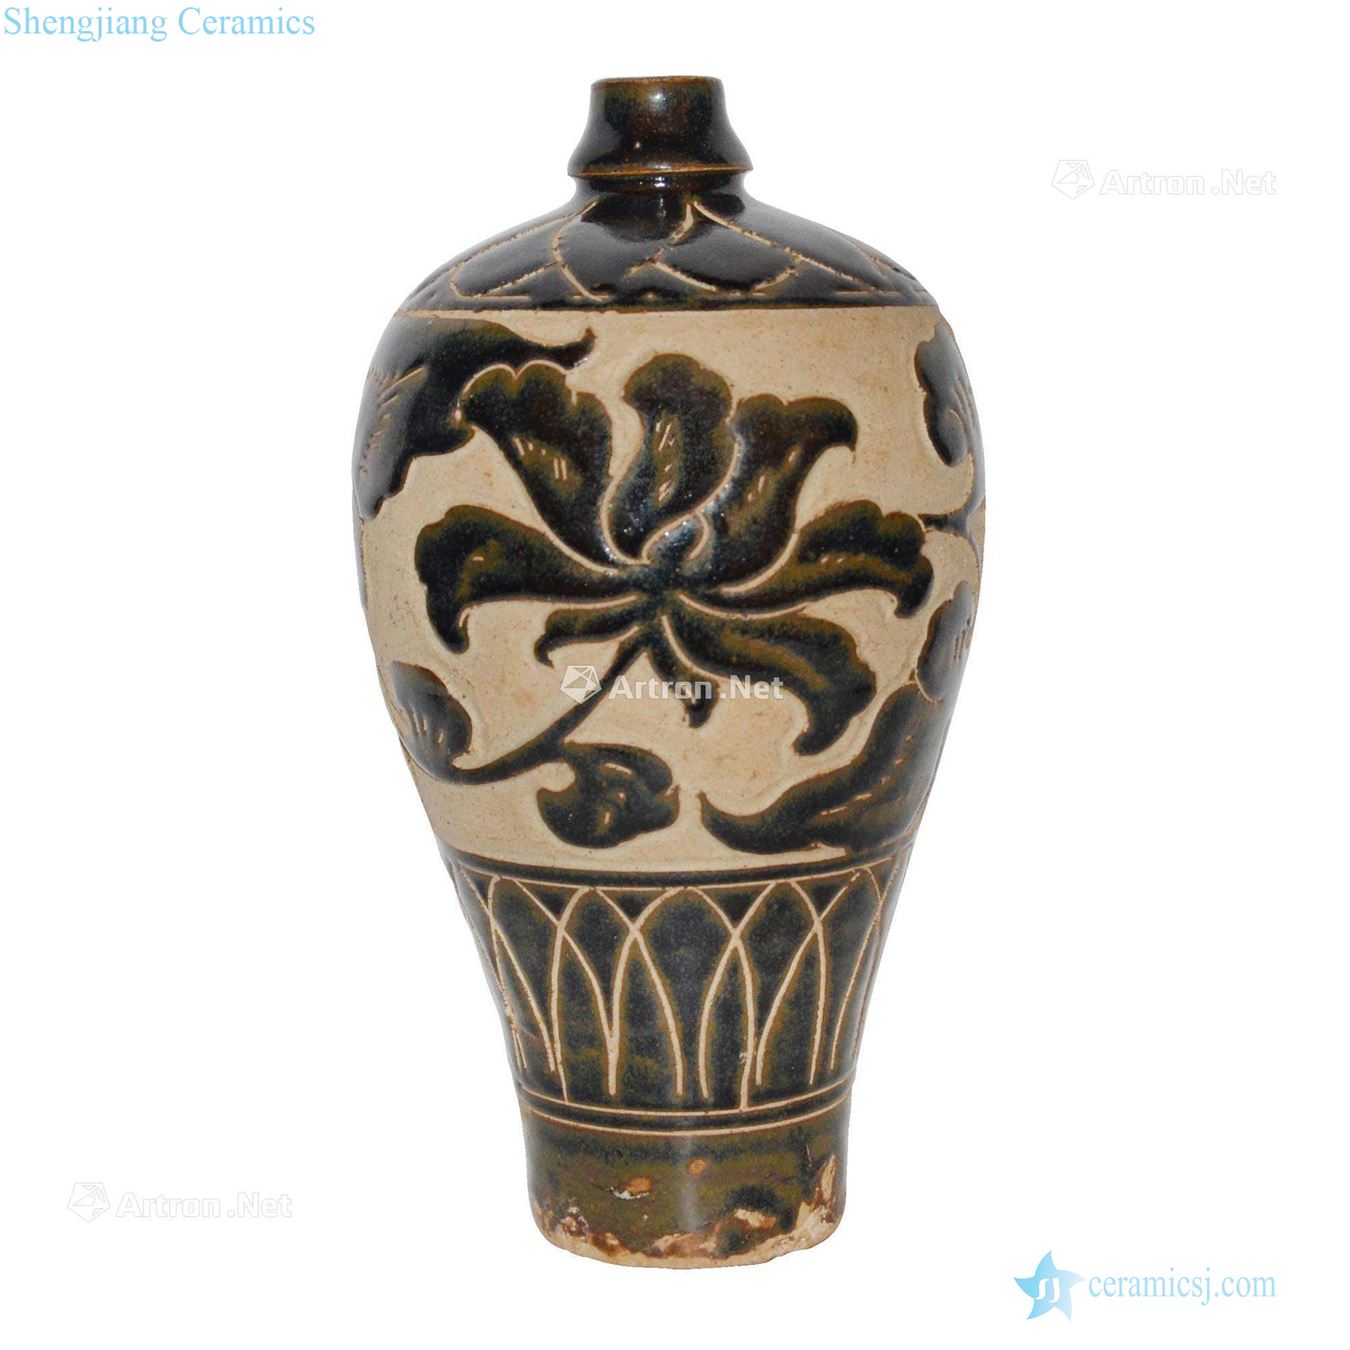 Xixia sauce glaze peony plum bottle of carve patterns or designs on woodwork